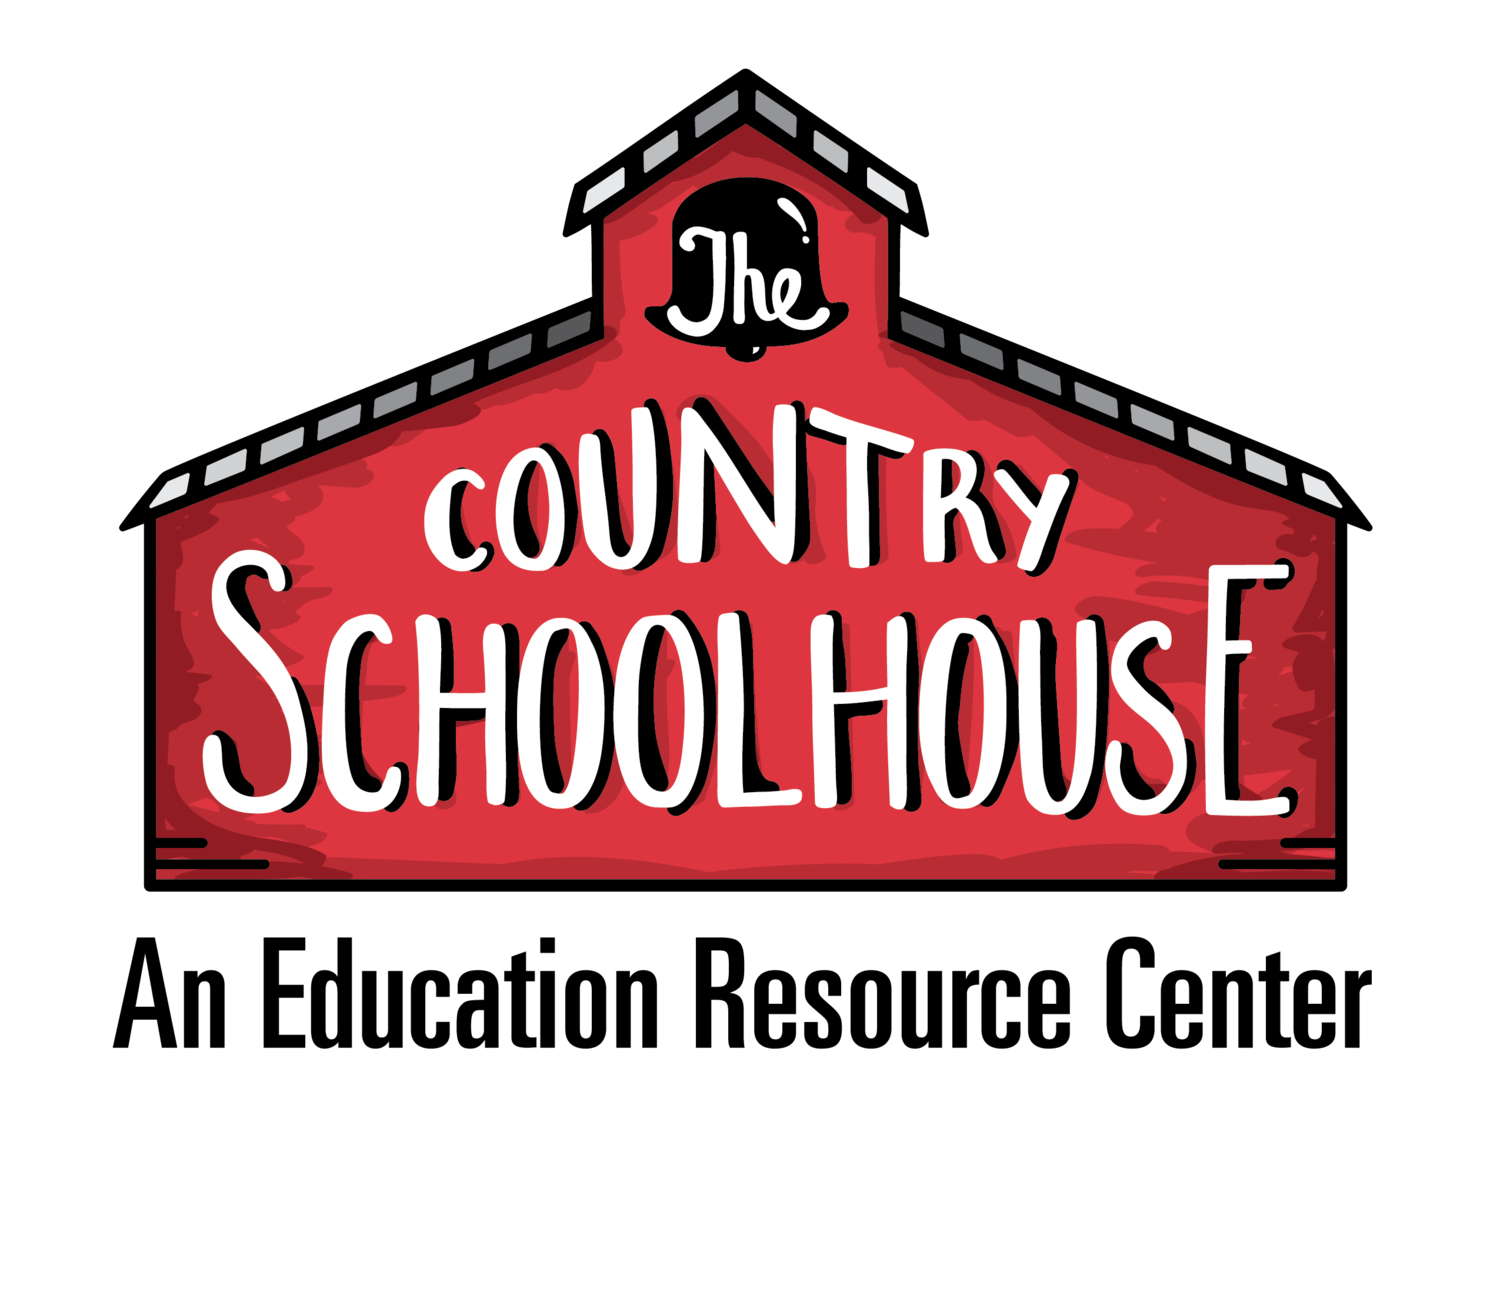 The Country Schoolhouse